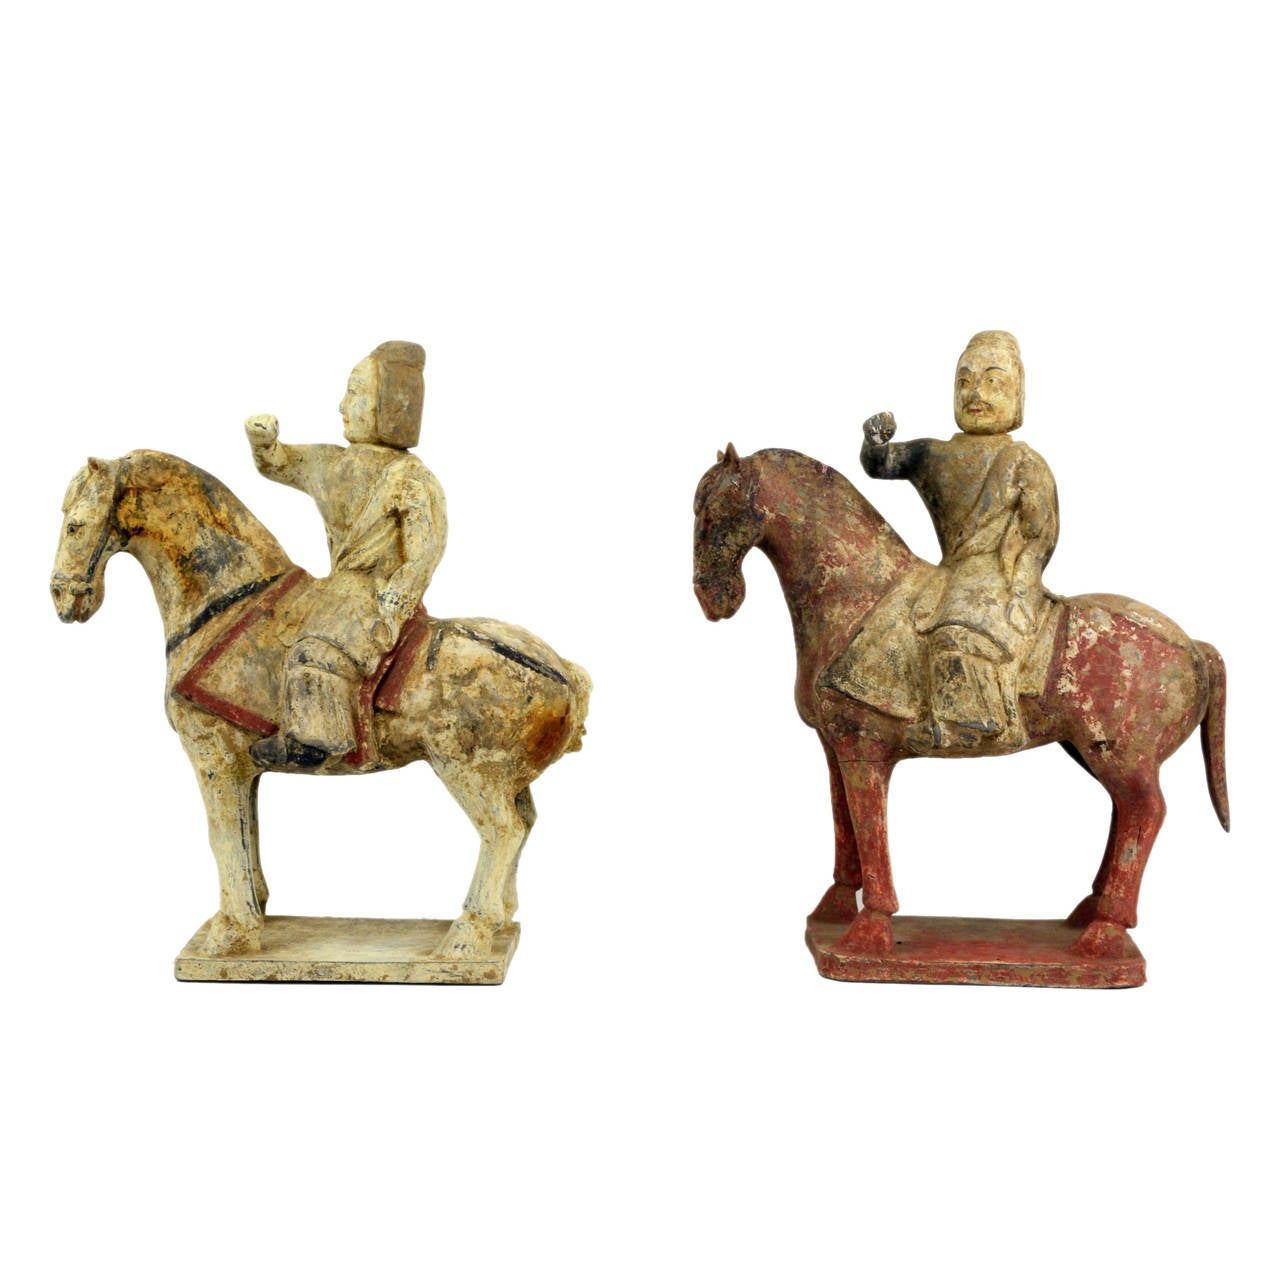 This pair of equestrians depicts soldiers of the Northern Qi Dynasty. The main characteristics of Northern Qi sculpture include the strong curve of the neck and the straight legs of the horse on a base without much movement. The depiction of the